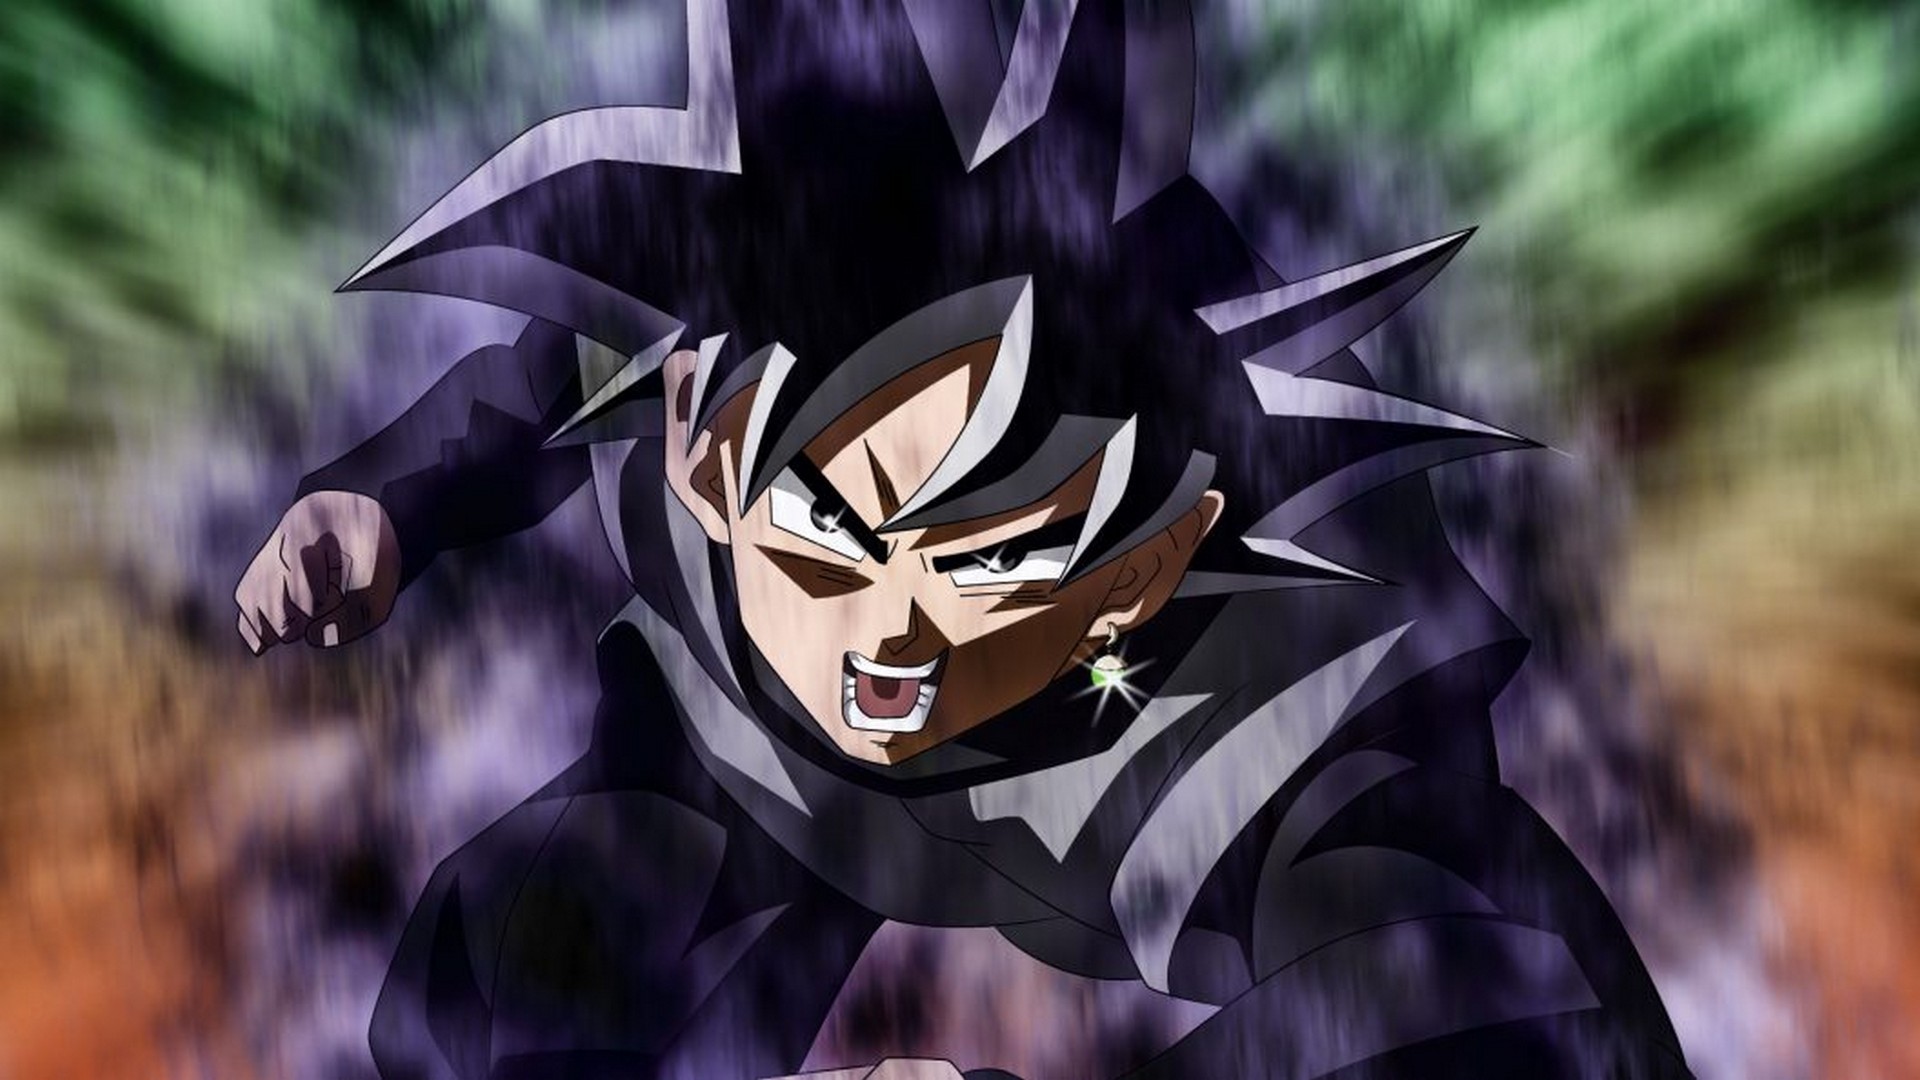 Black Goku Wallpaper HD With Resolution 1920X1080 pixel. You can make this wallpaper for your Desktop Computer Backgrounds, Mac Wallpapers, Android Lock screen or iPhone Screensavers